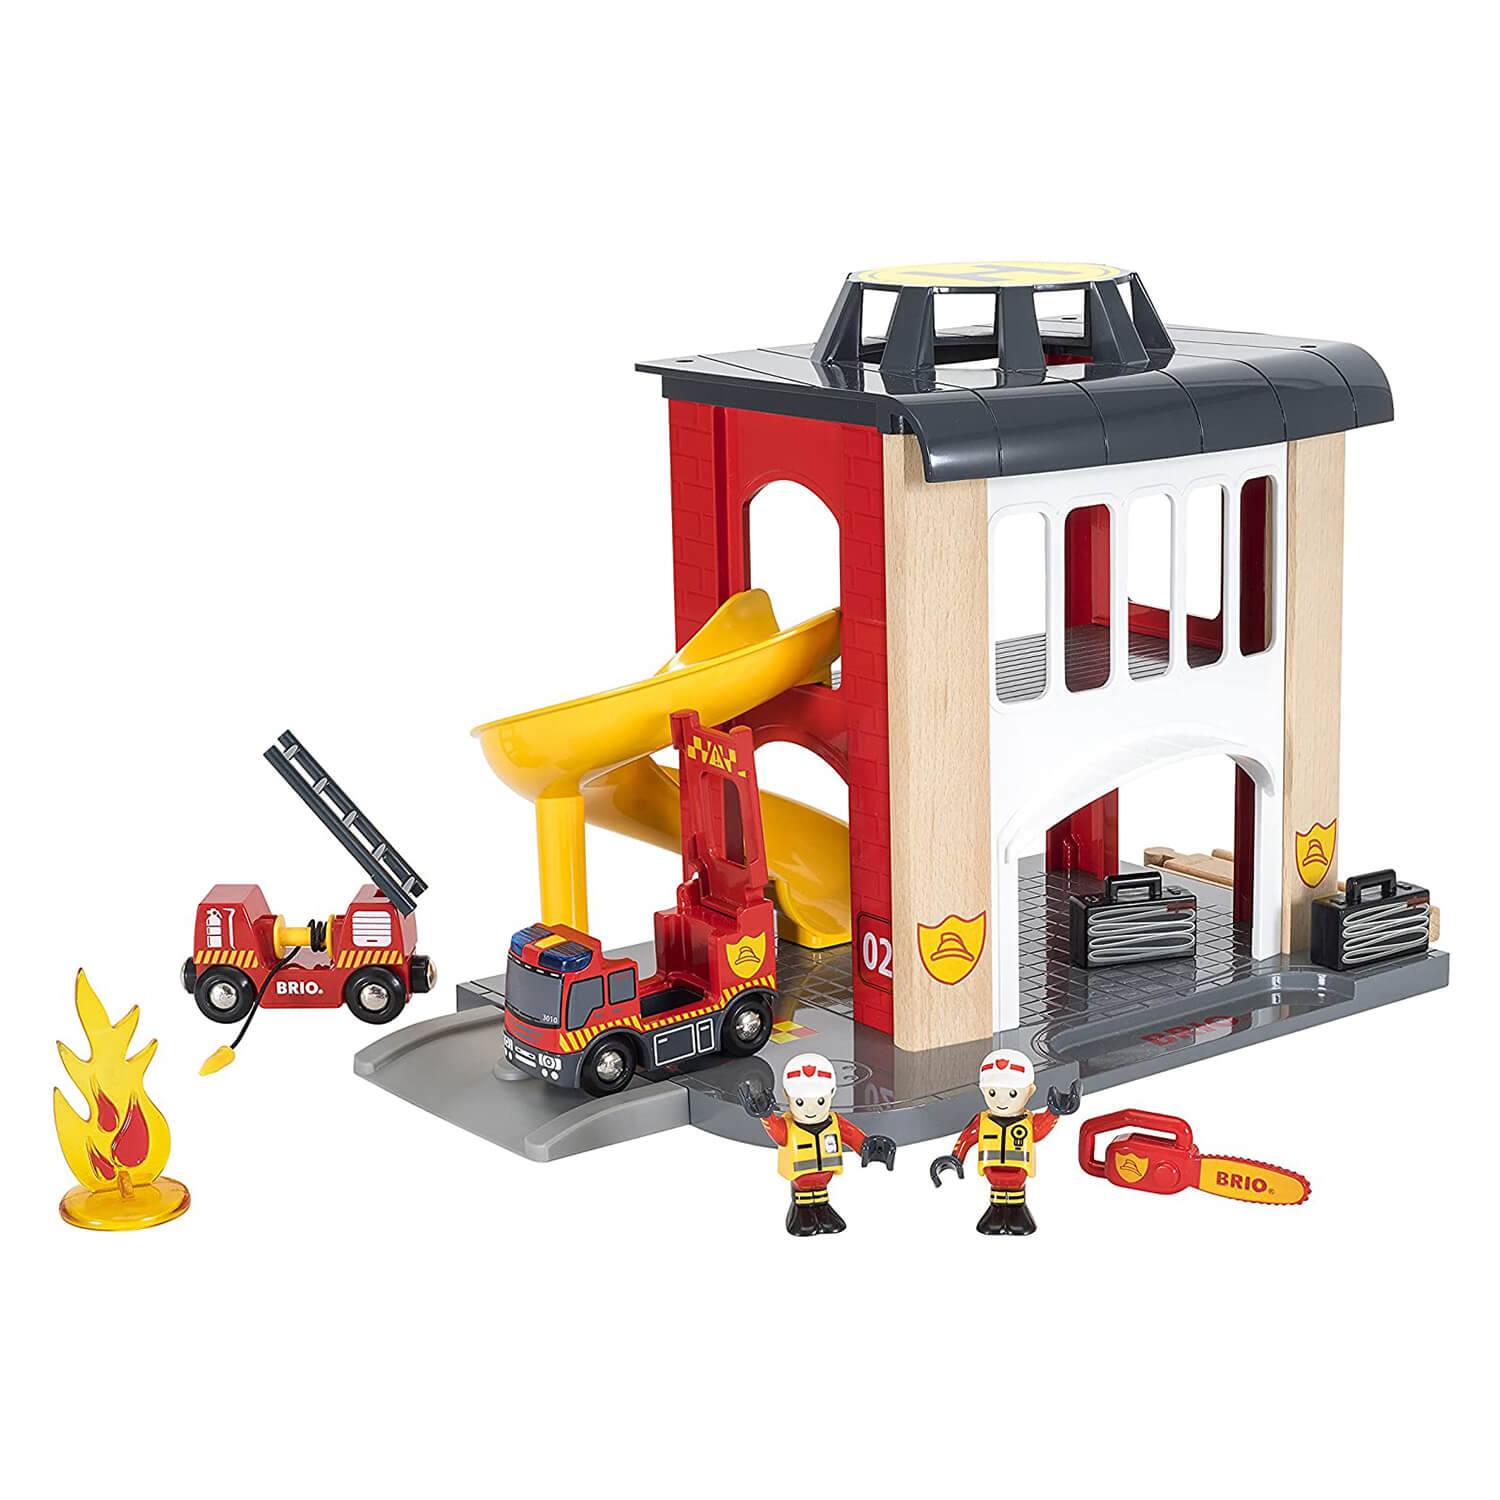 Display of the Brio Central Fire Station.